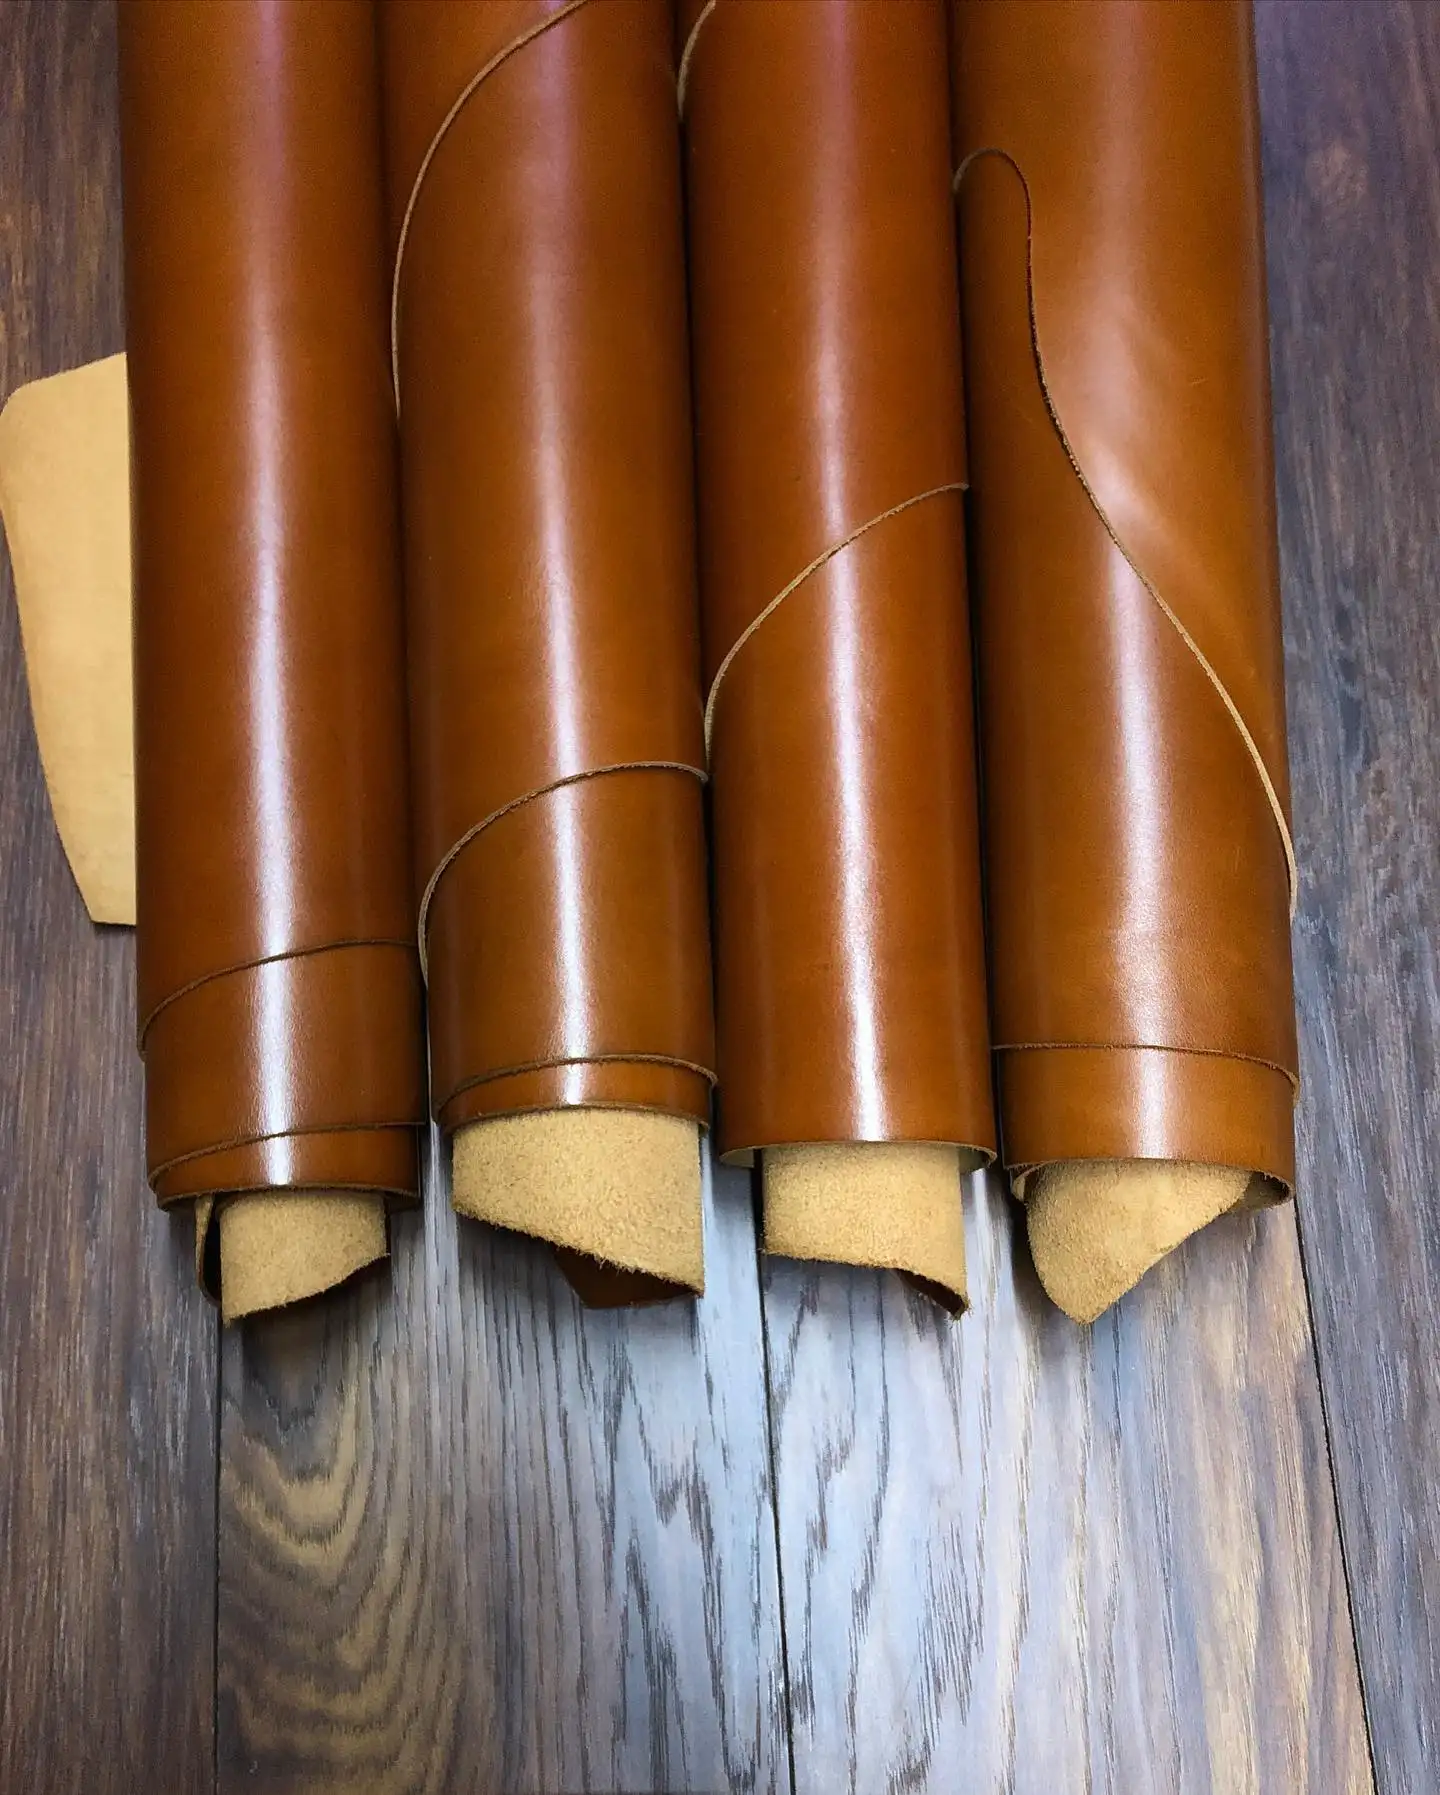 2022 Top Grain Cow Hide Cattle Real Leather Material Full Grain Made in Turkey high quality full grain Leather 100% Genuine